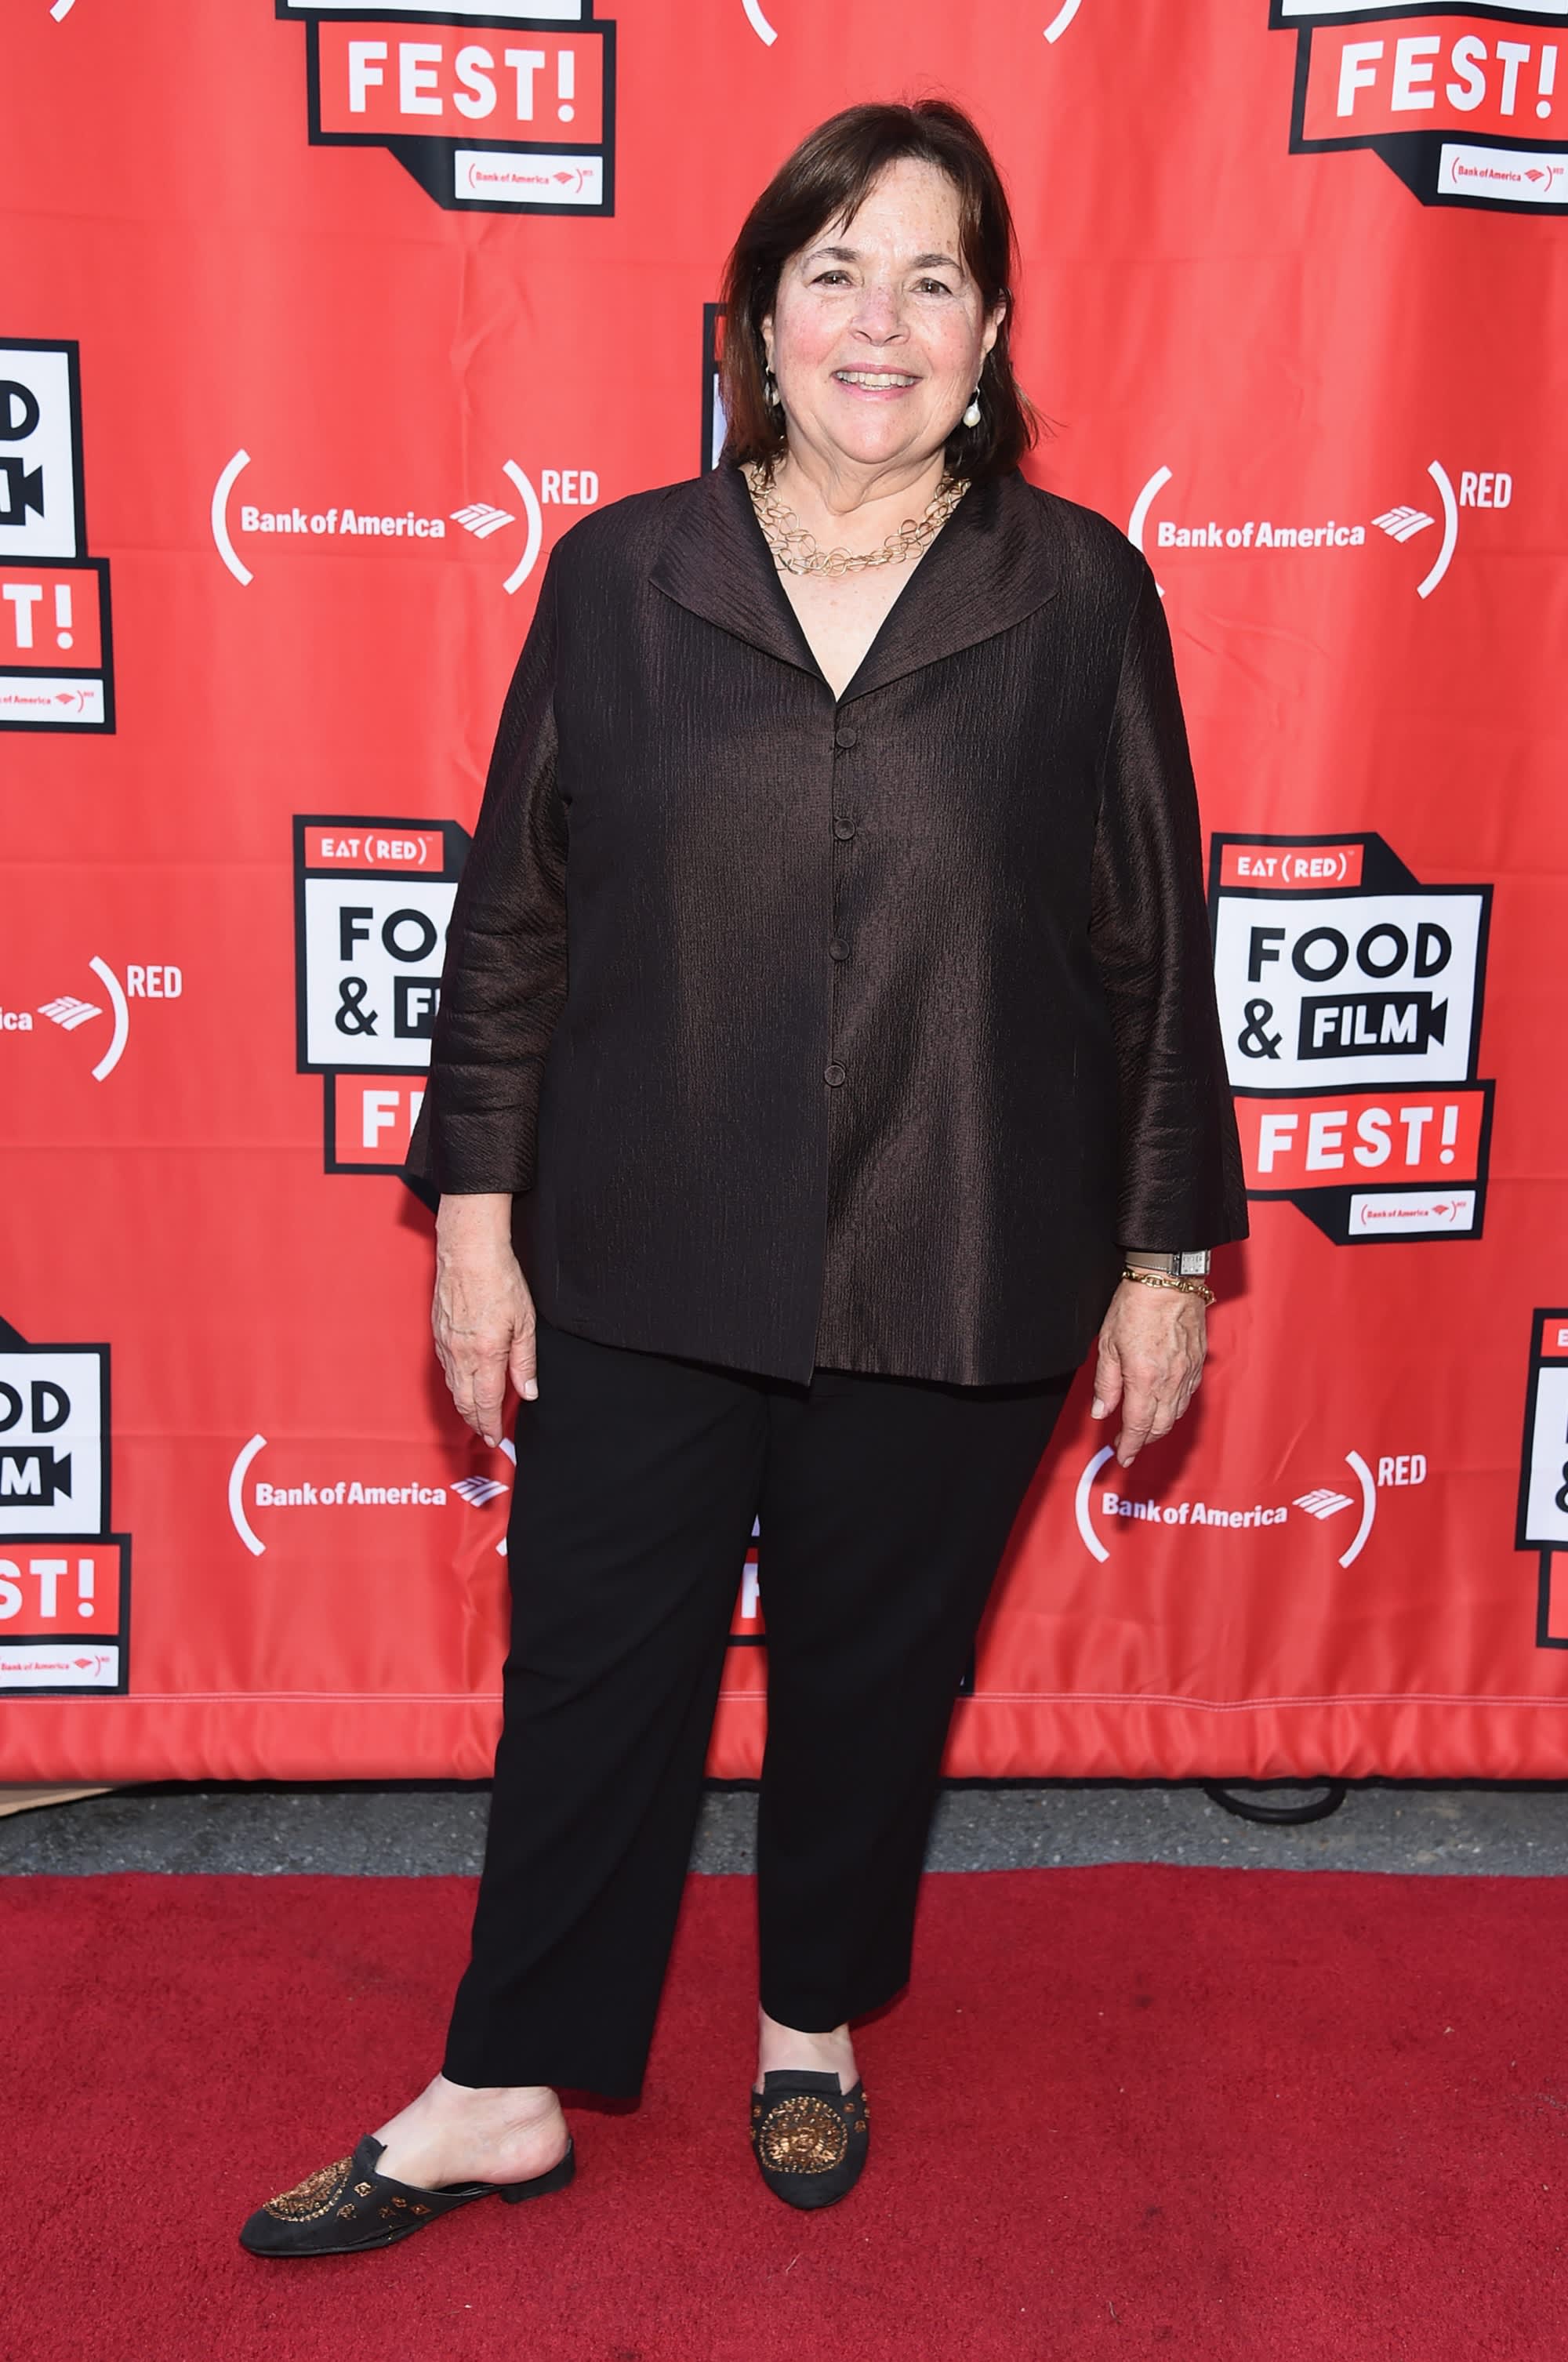 Ina Garten's best advice for making a career change